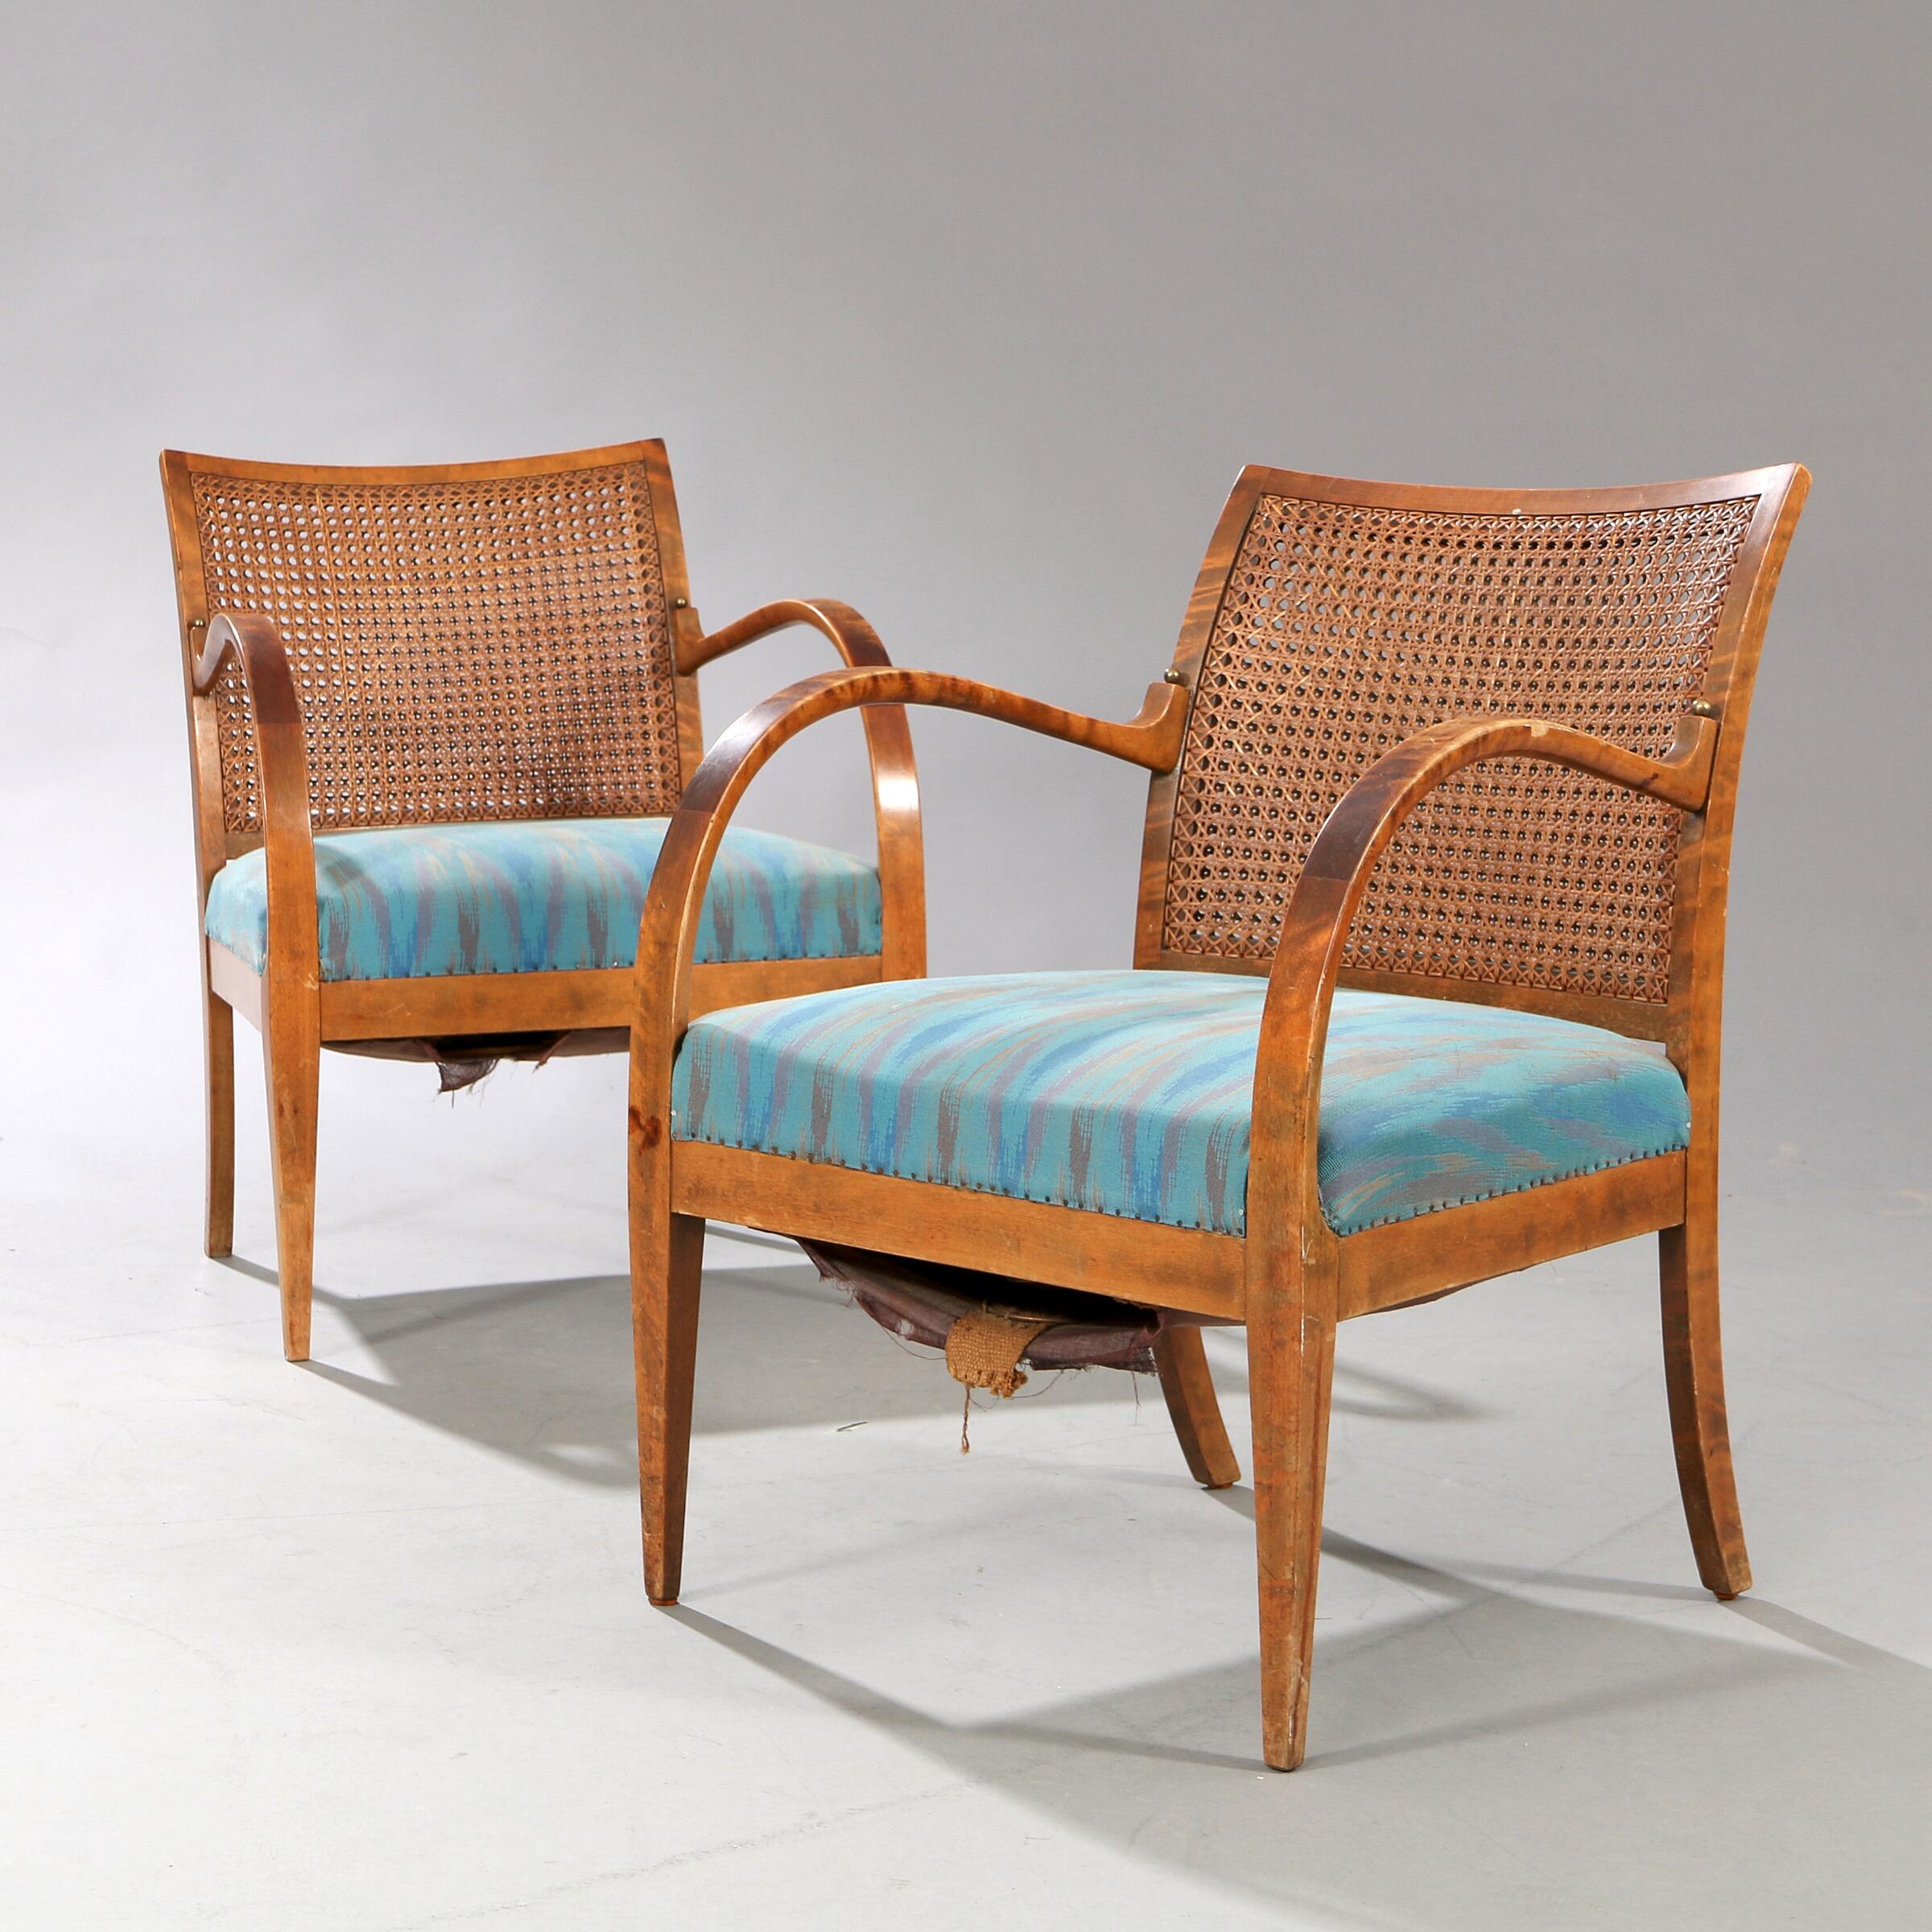 A pair of nut wood armchairs. Seat with blue patterned fabric. Back with woven cane. Made by cabinetmaker Jørgen Christensen. (2)
Condition:
Wear of use, including scratches. Girths with defects.